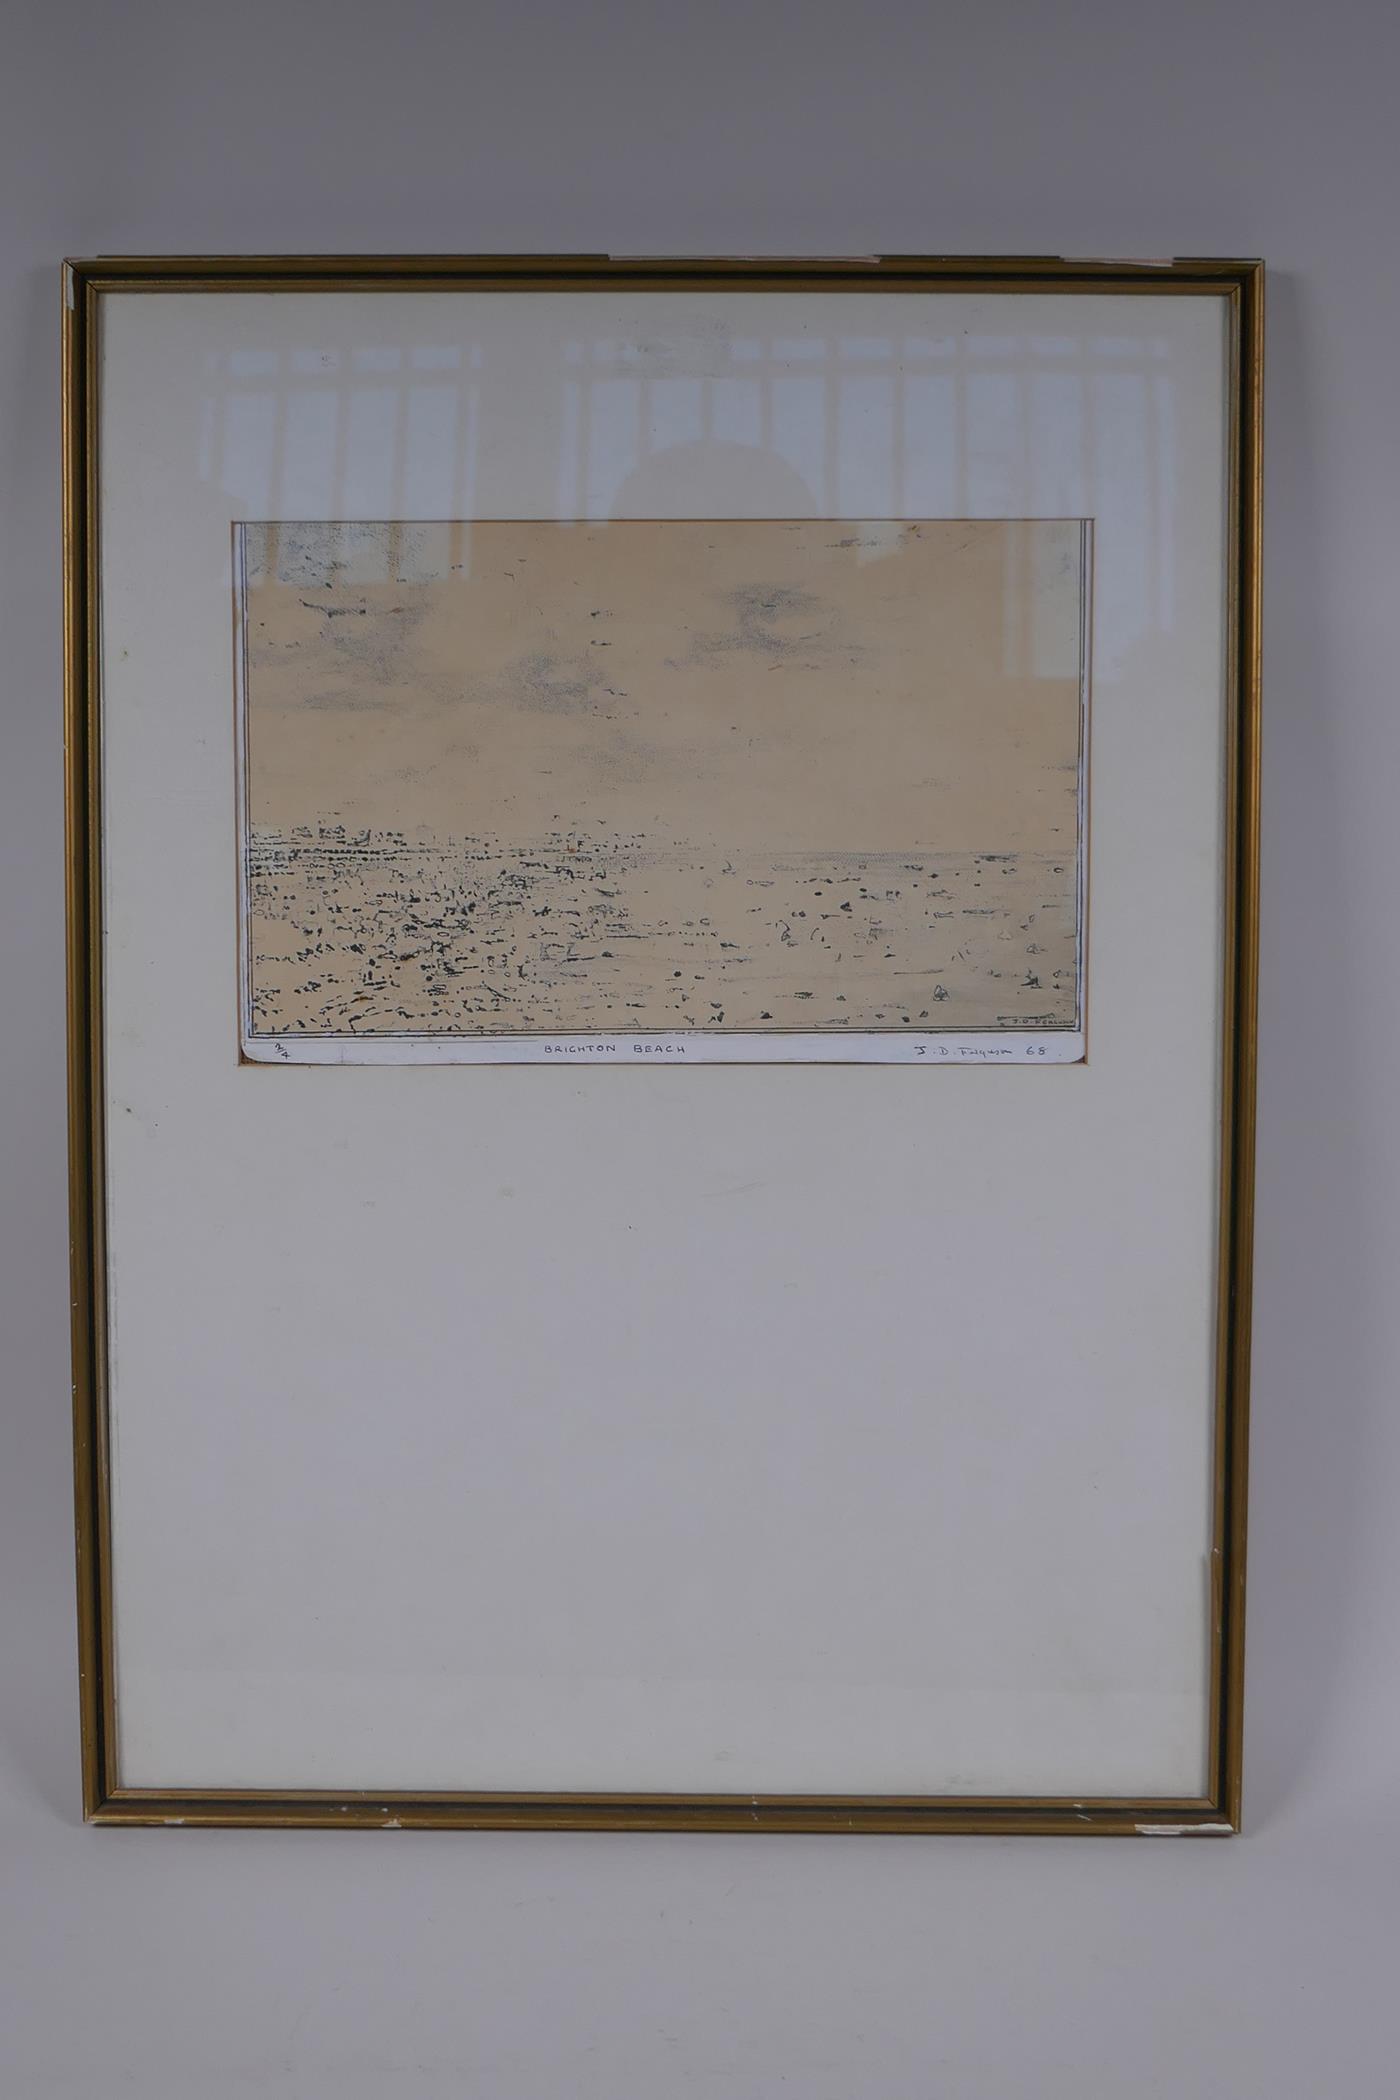 J. D. Ferguson, (19)68, Brighton Beach, hand finished lithograph, numbered 2/4, 28 x 17cm - Image 6 of 6